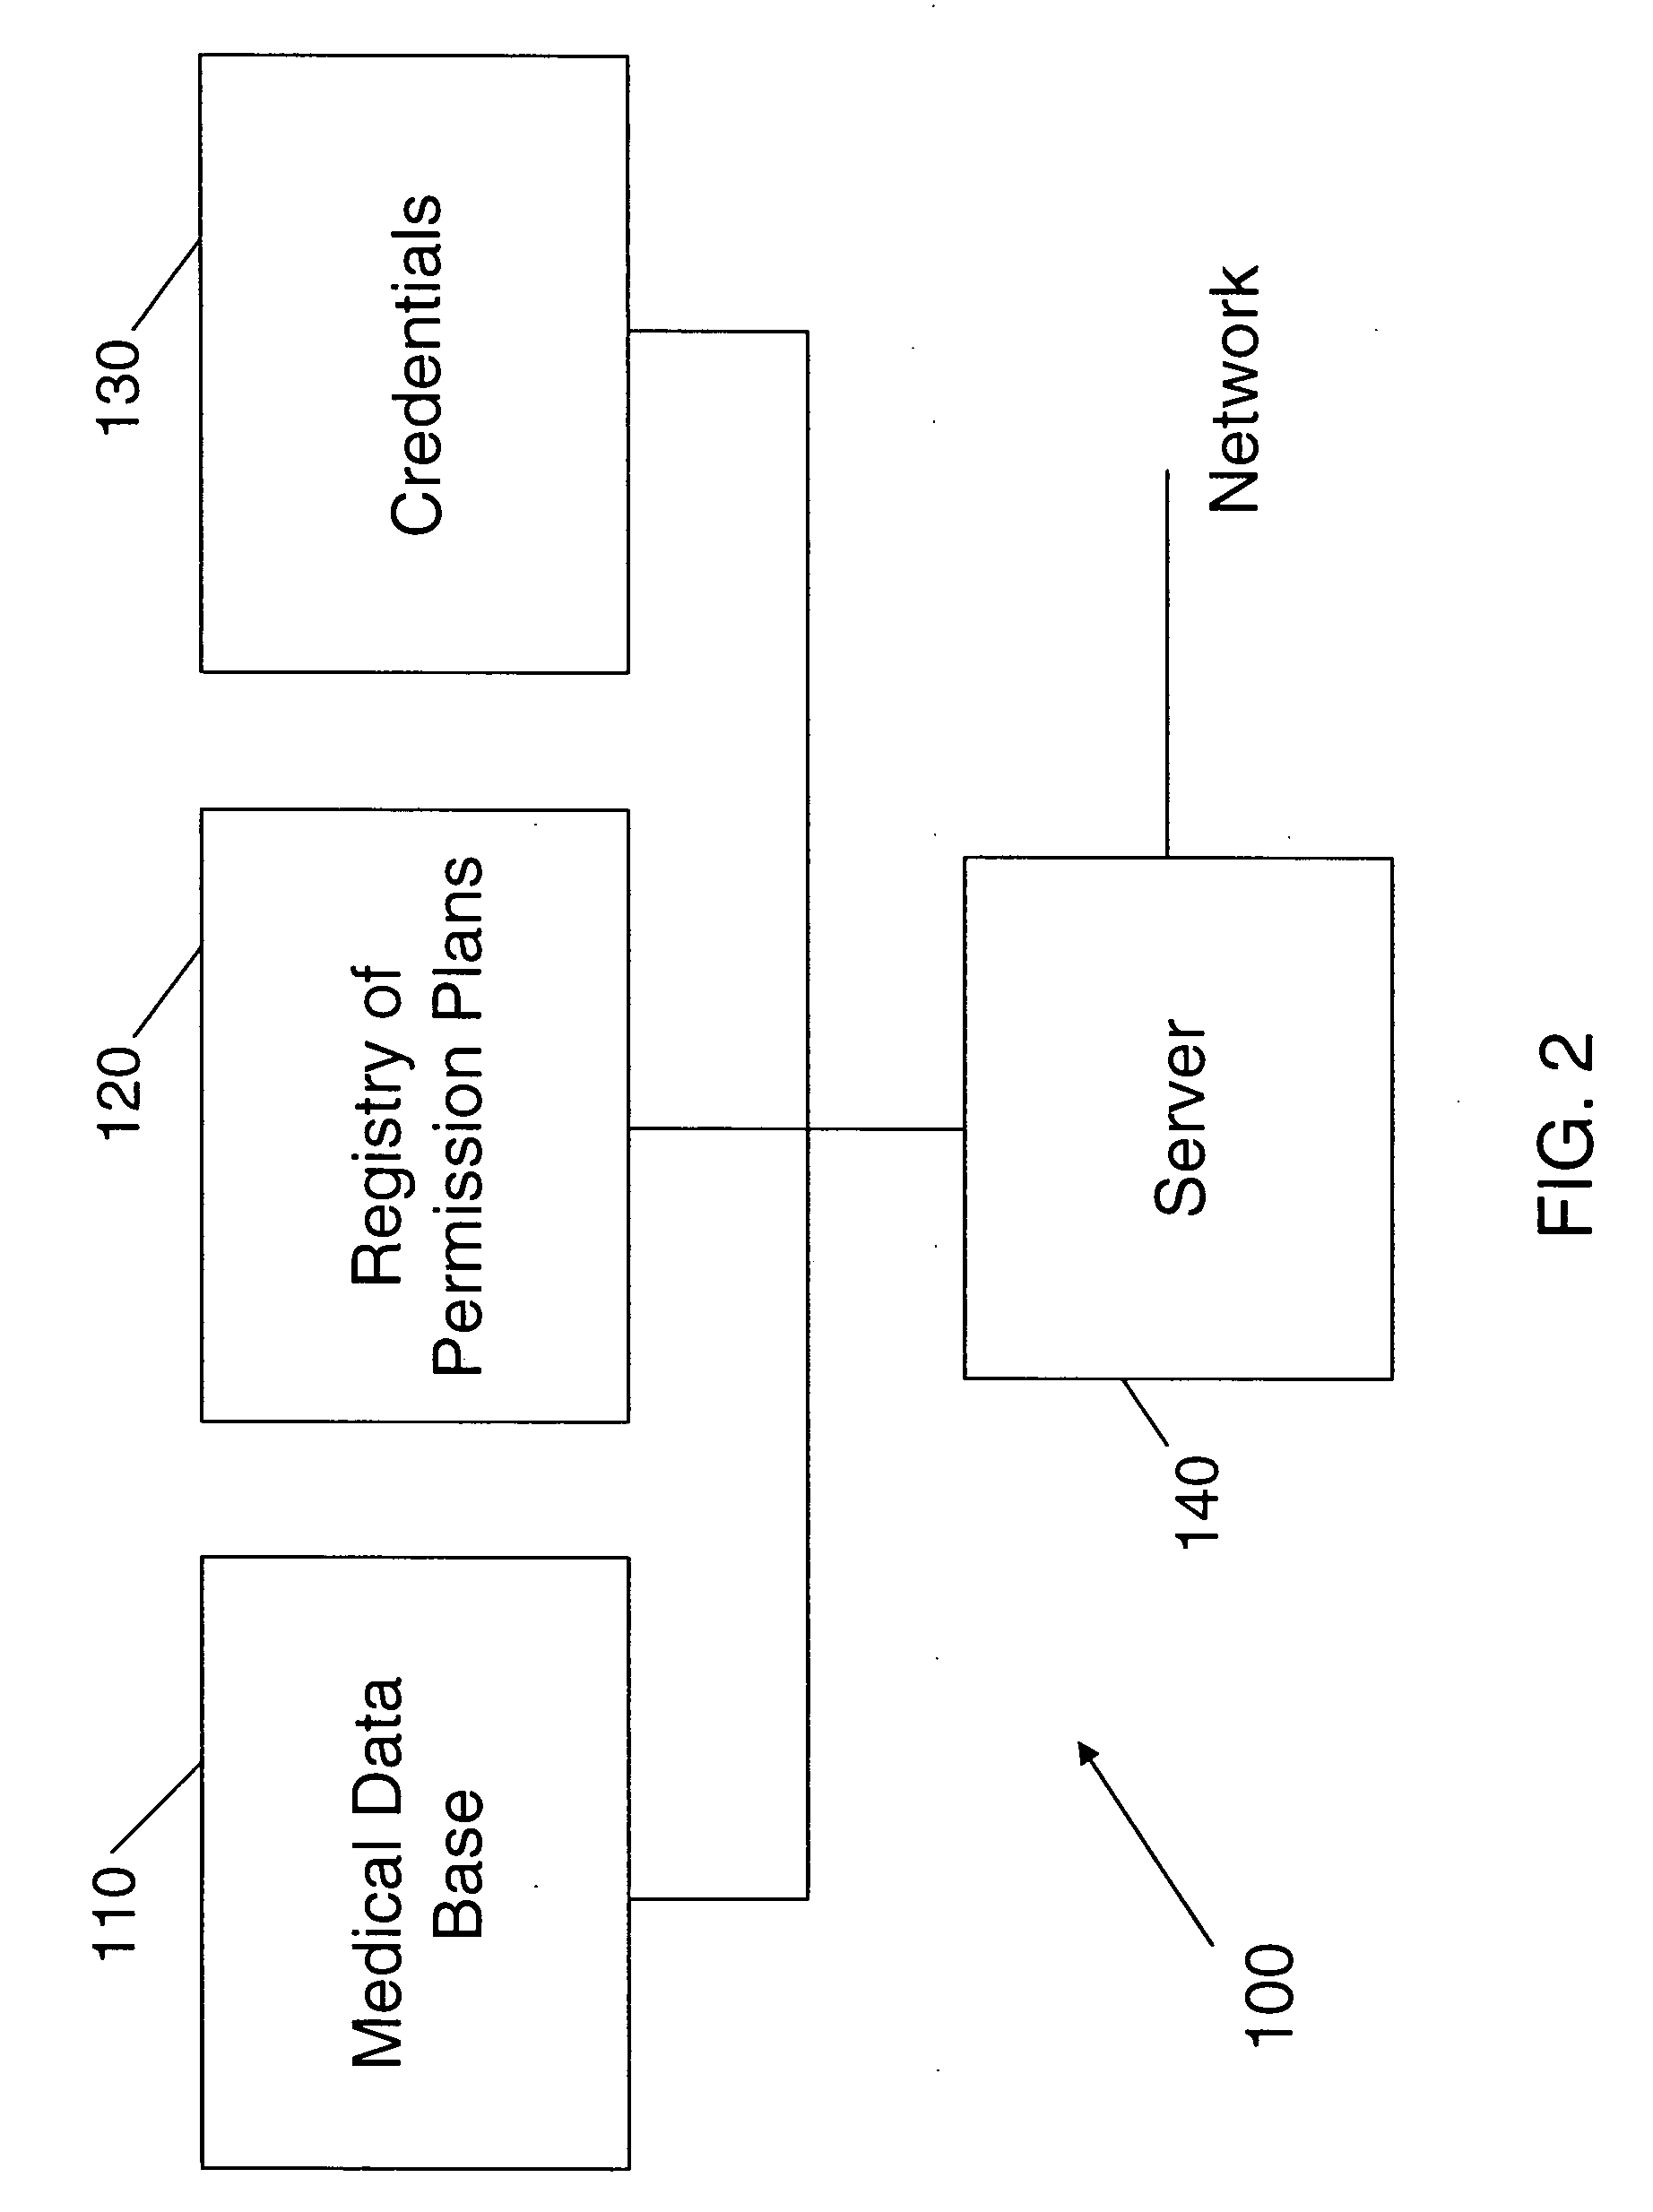 Method for managing the release of data